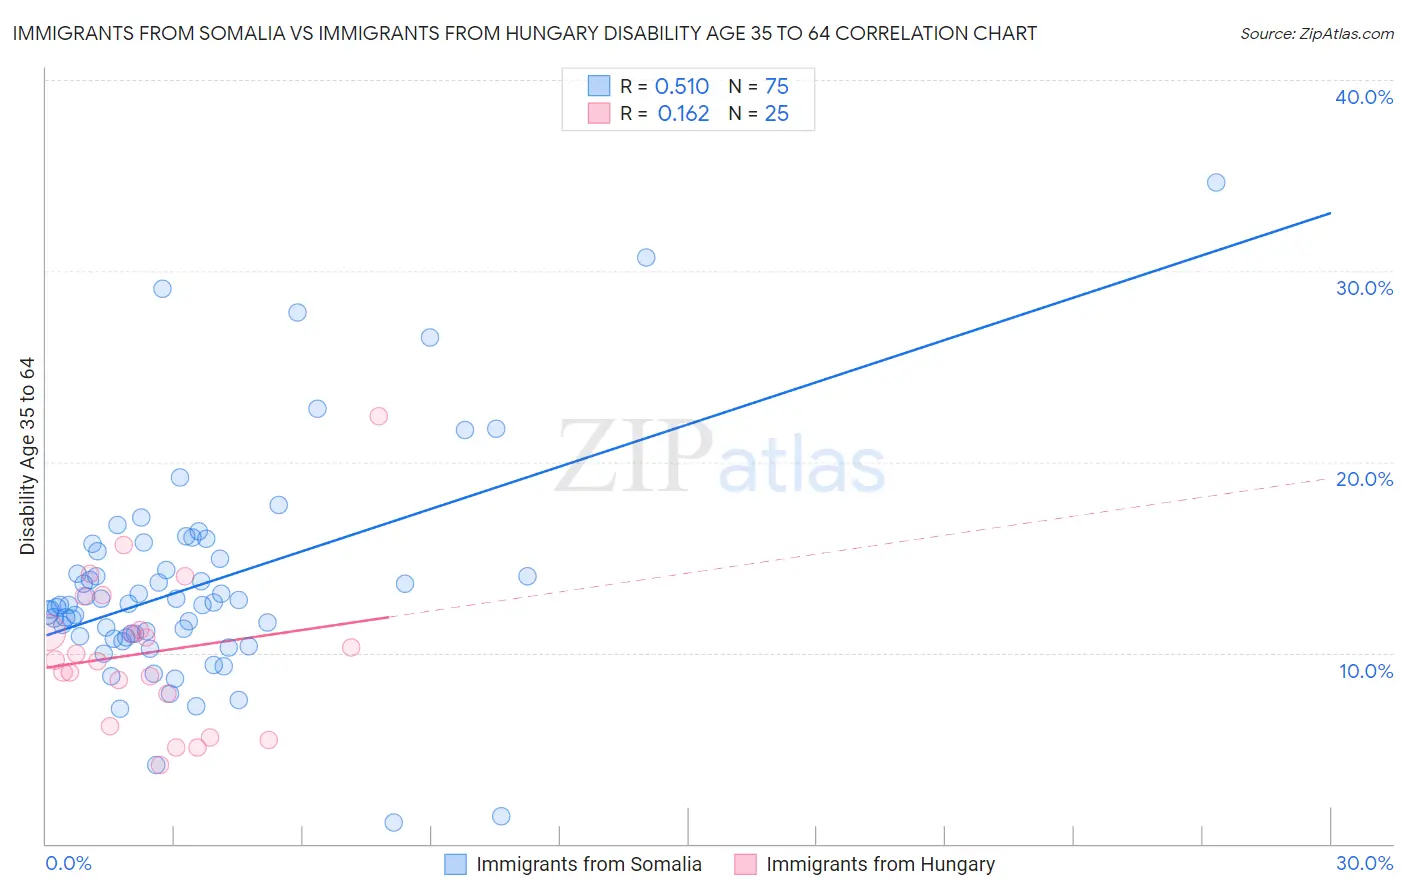 Immigrants from Somalia vs Immigrants from Hungary Disability Age 35 to 64